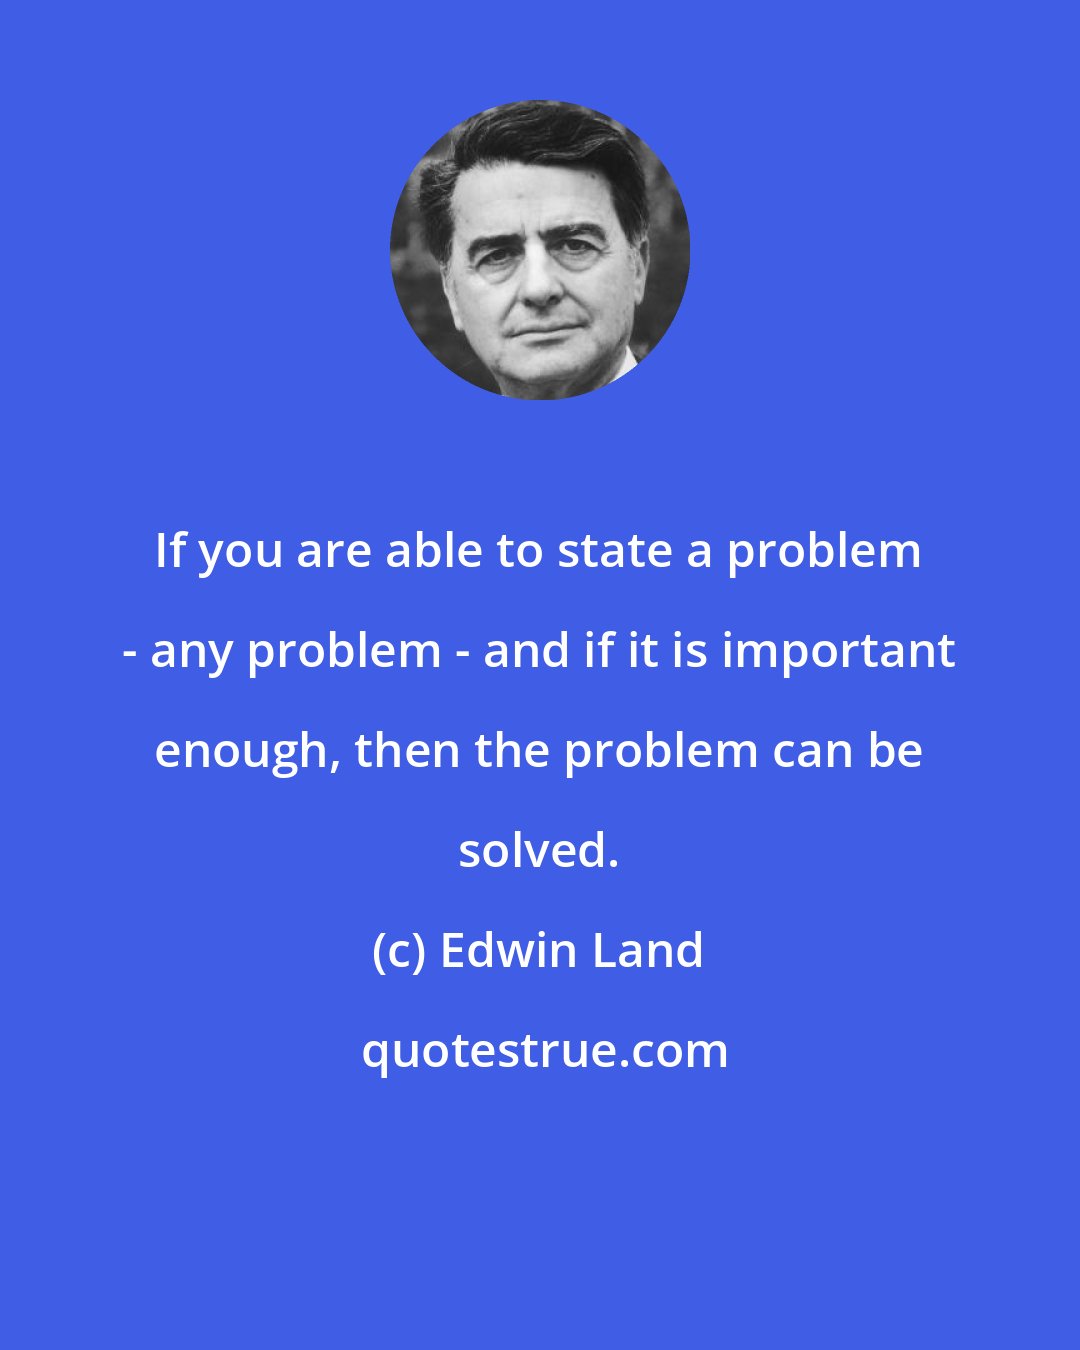 Edwin Land: If you are able to state a problem - any problem - and if it is important enough, then the problem can be solved.